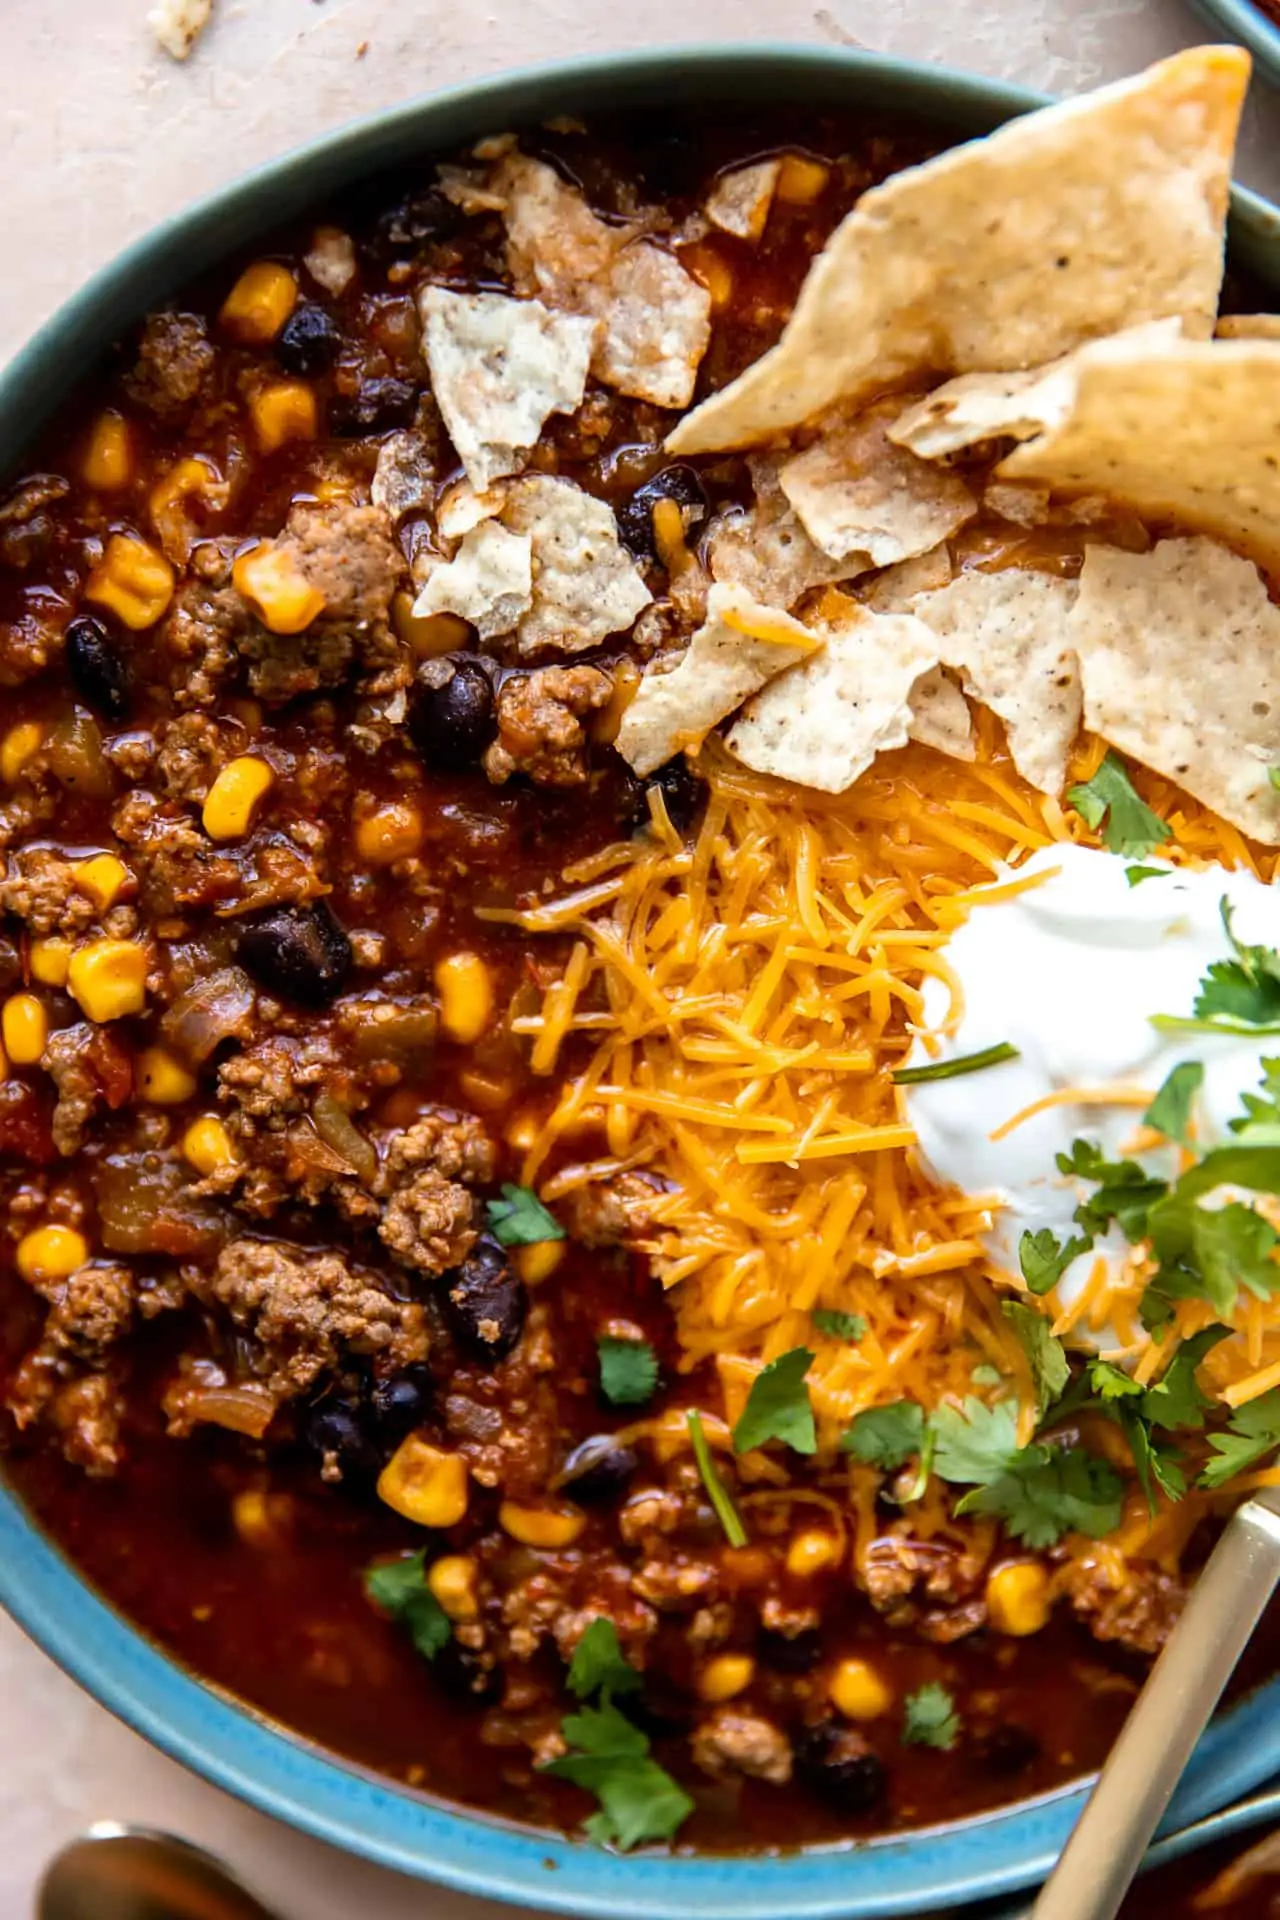 Up close view of a bowl of taco soup showing chunks of beef, beans and corn in a dark red broth topped with melted cheese and sour cream.